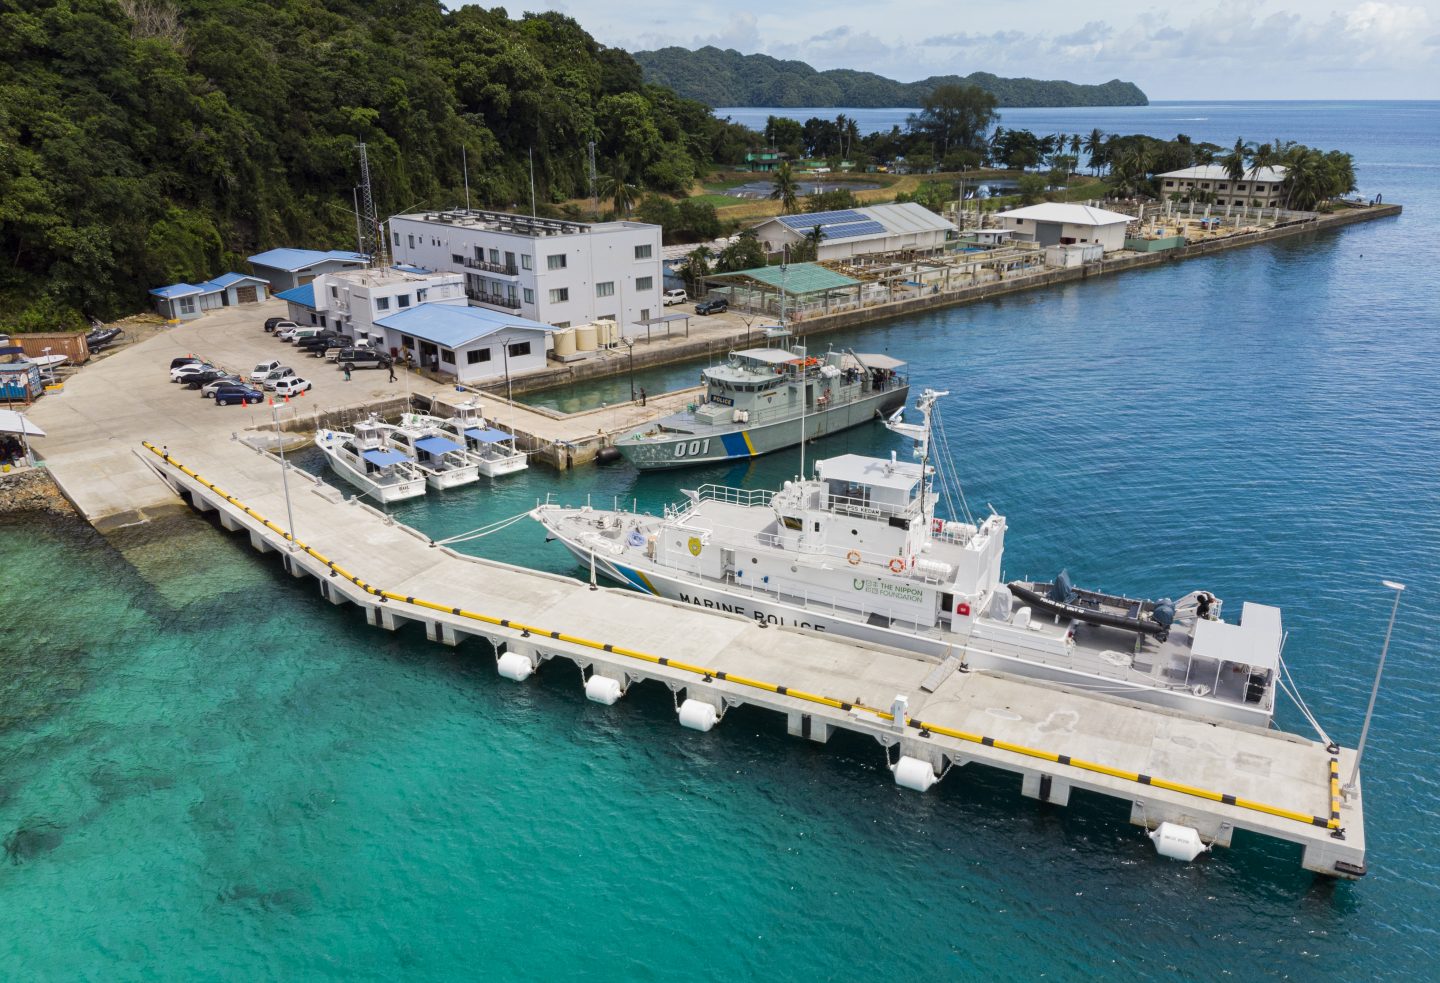 With international support, including a new patrol boat gifted in 2018 by Japan’s Nippon Foundation (white vessel in foreground), Palau’s marine law enforcement capabilities have improved greatly in recent years. 